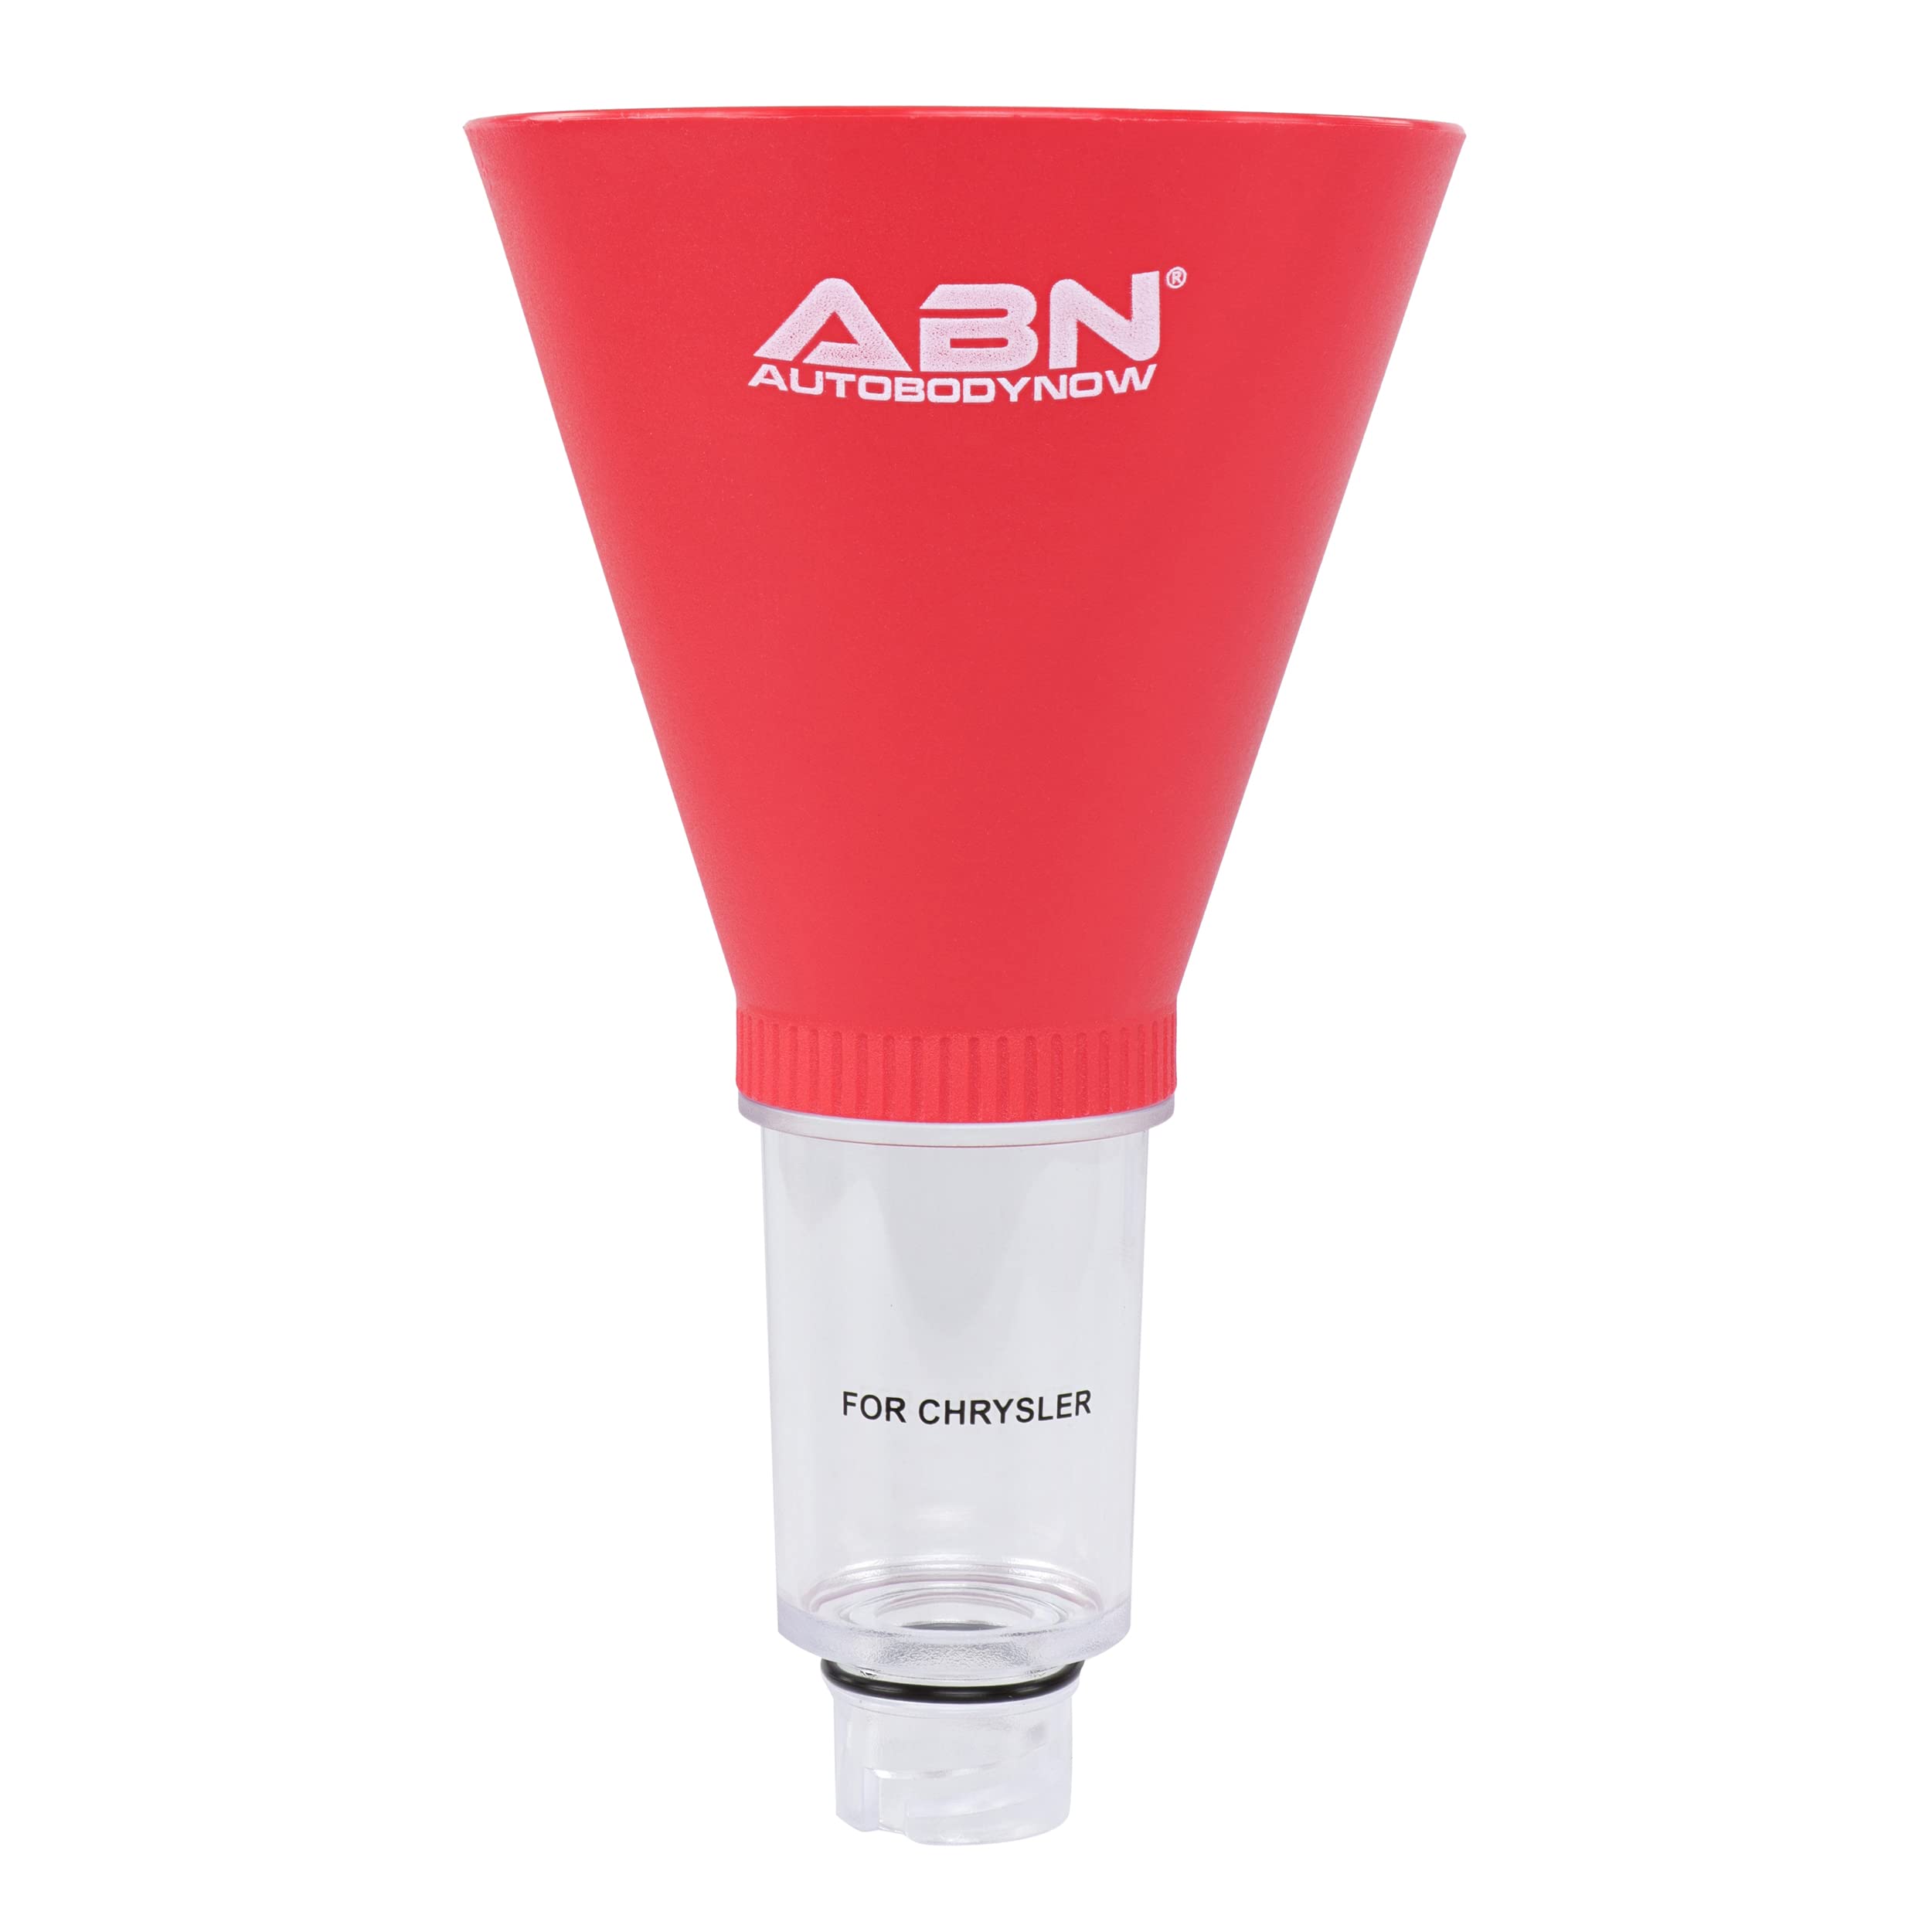 ABN Automotive Funnel - Engine Oil Funnel compatible with chrysler for Use as Oil change Funnel with No Spill